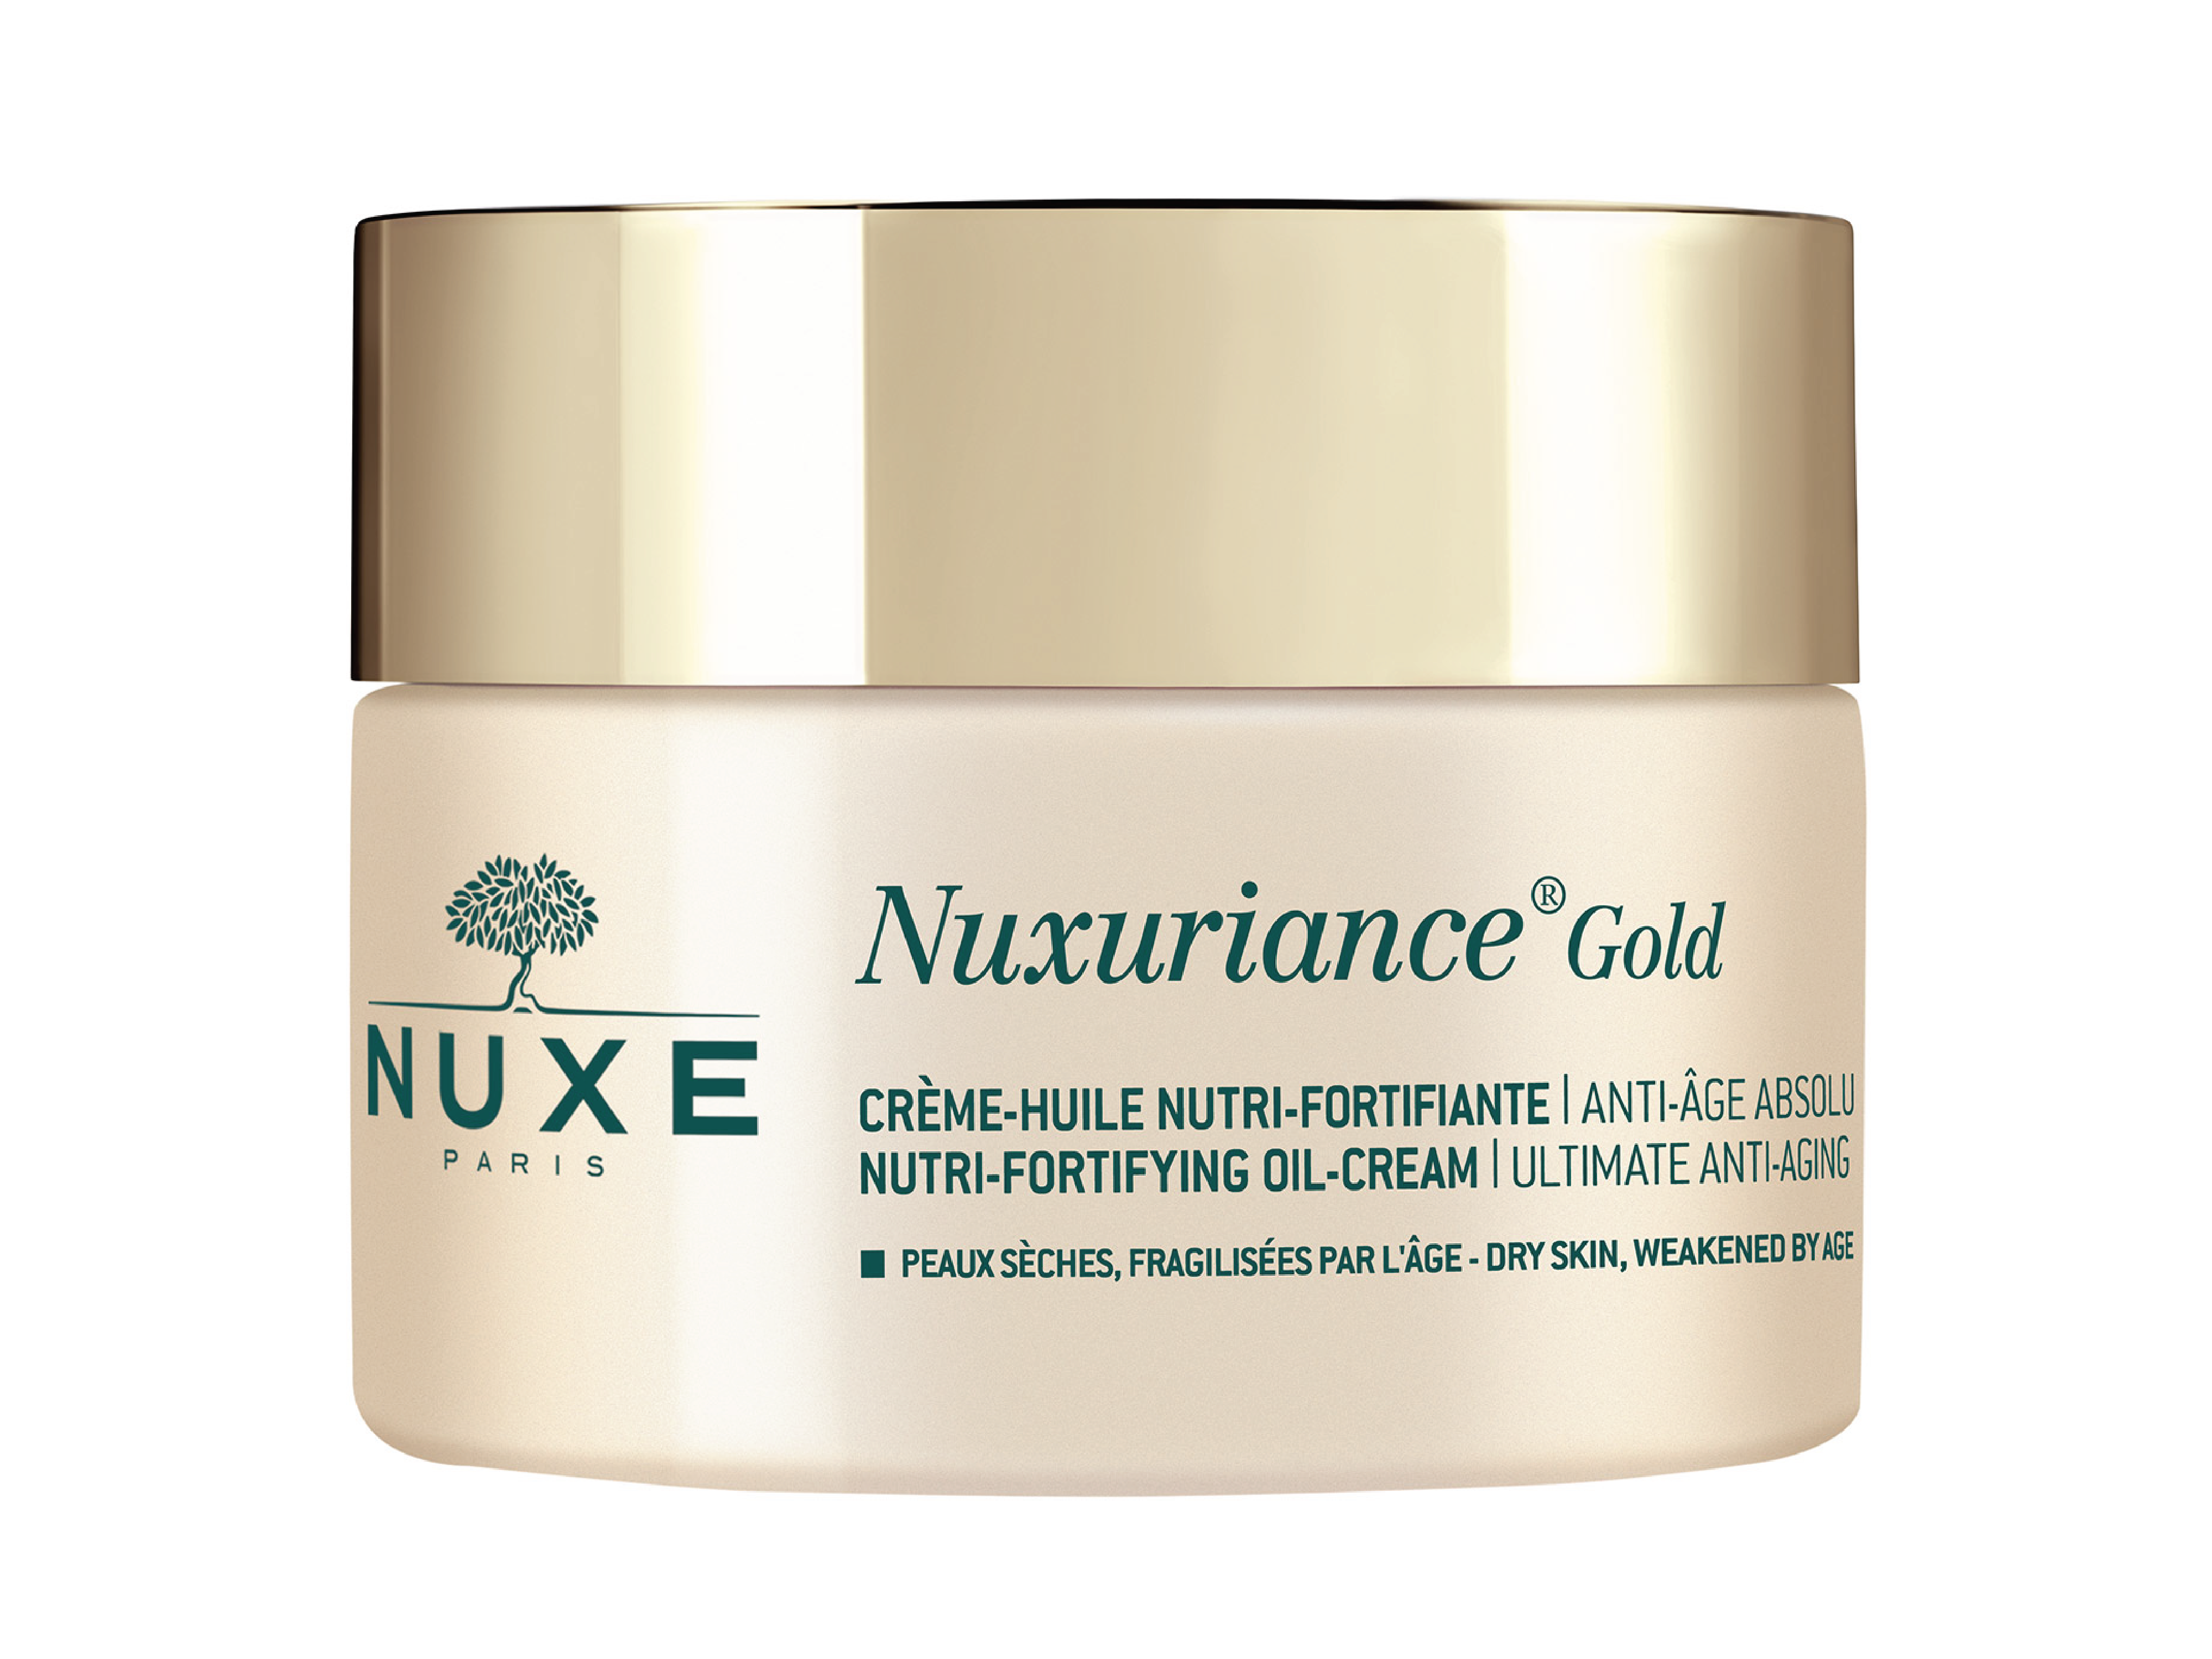 NUXE Nuxuriance Gold Nutri-Fortifying Oil-Cream, 50 ml